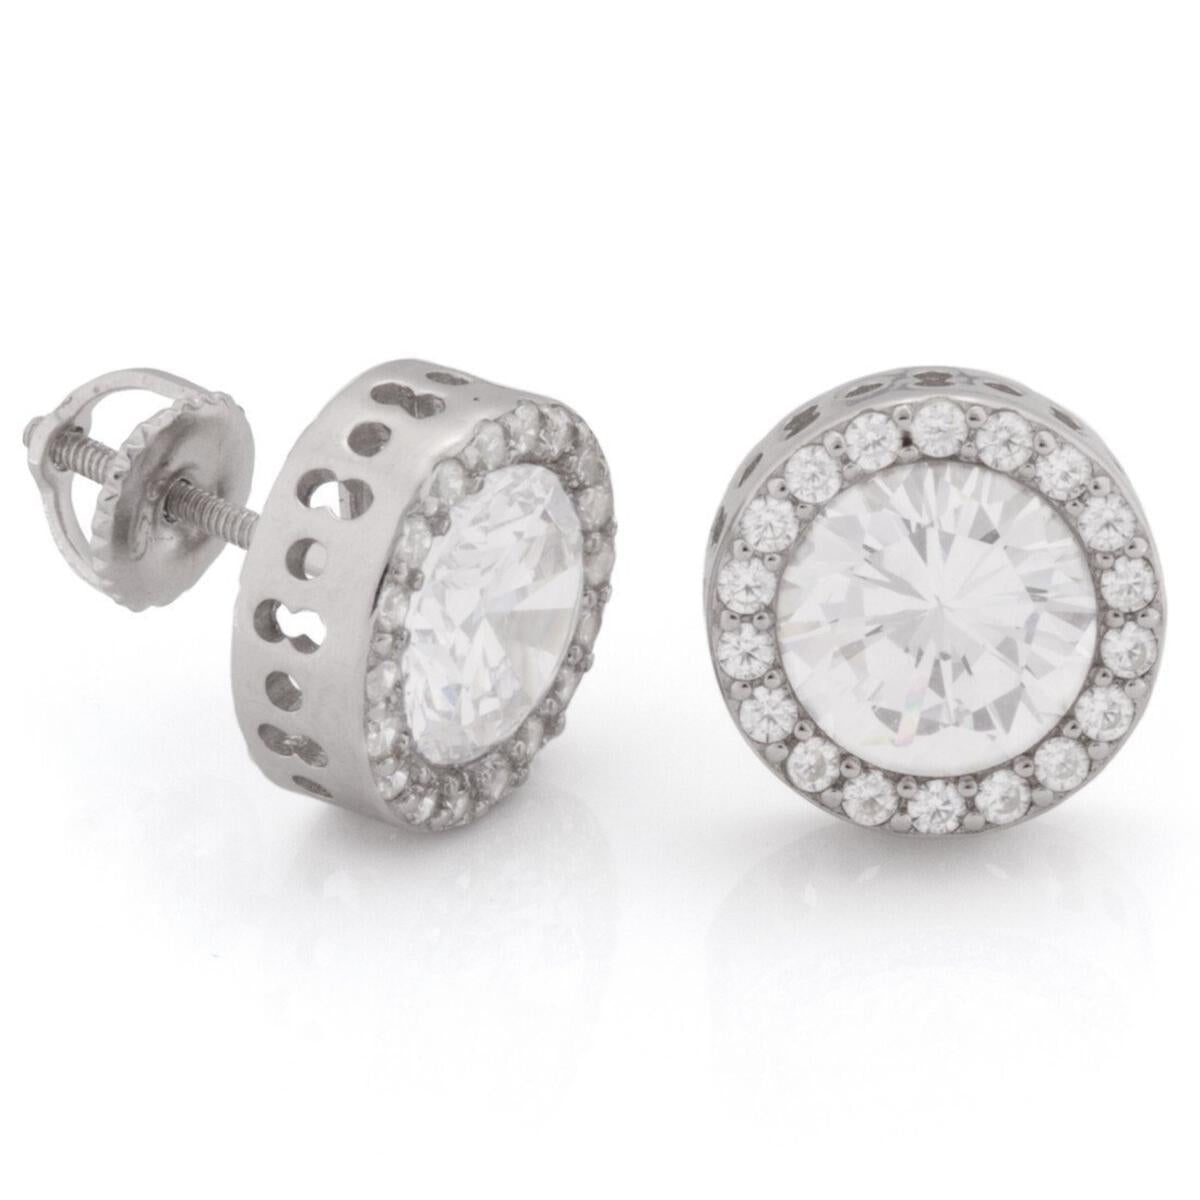 KING ICE: 12mm White Gold Button Earrings